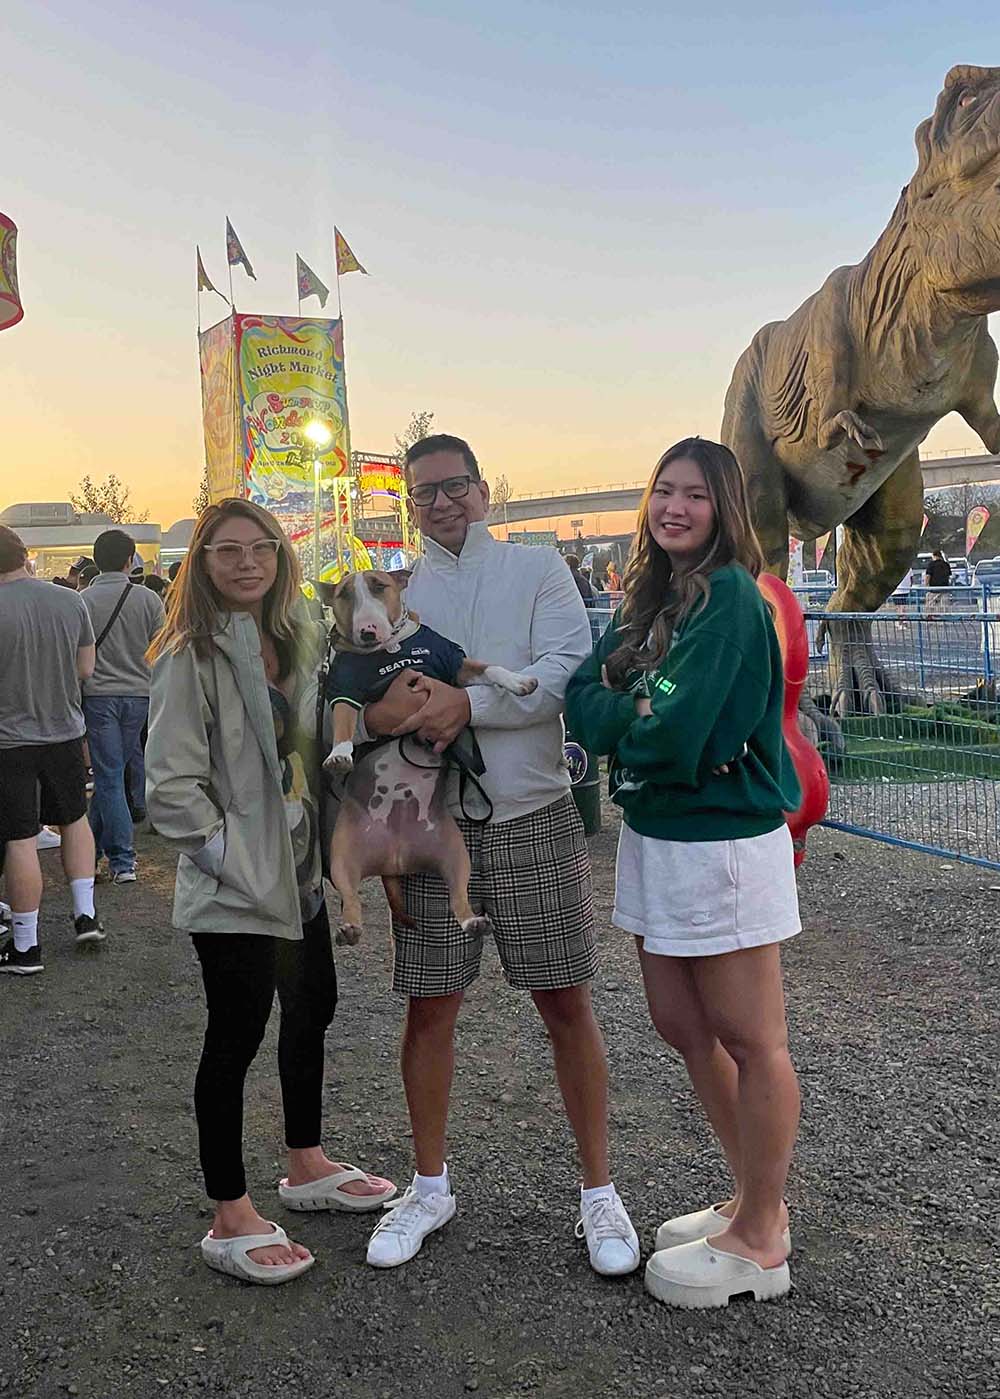 Family with dog stands outside at fair and smiles